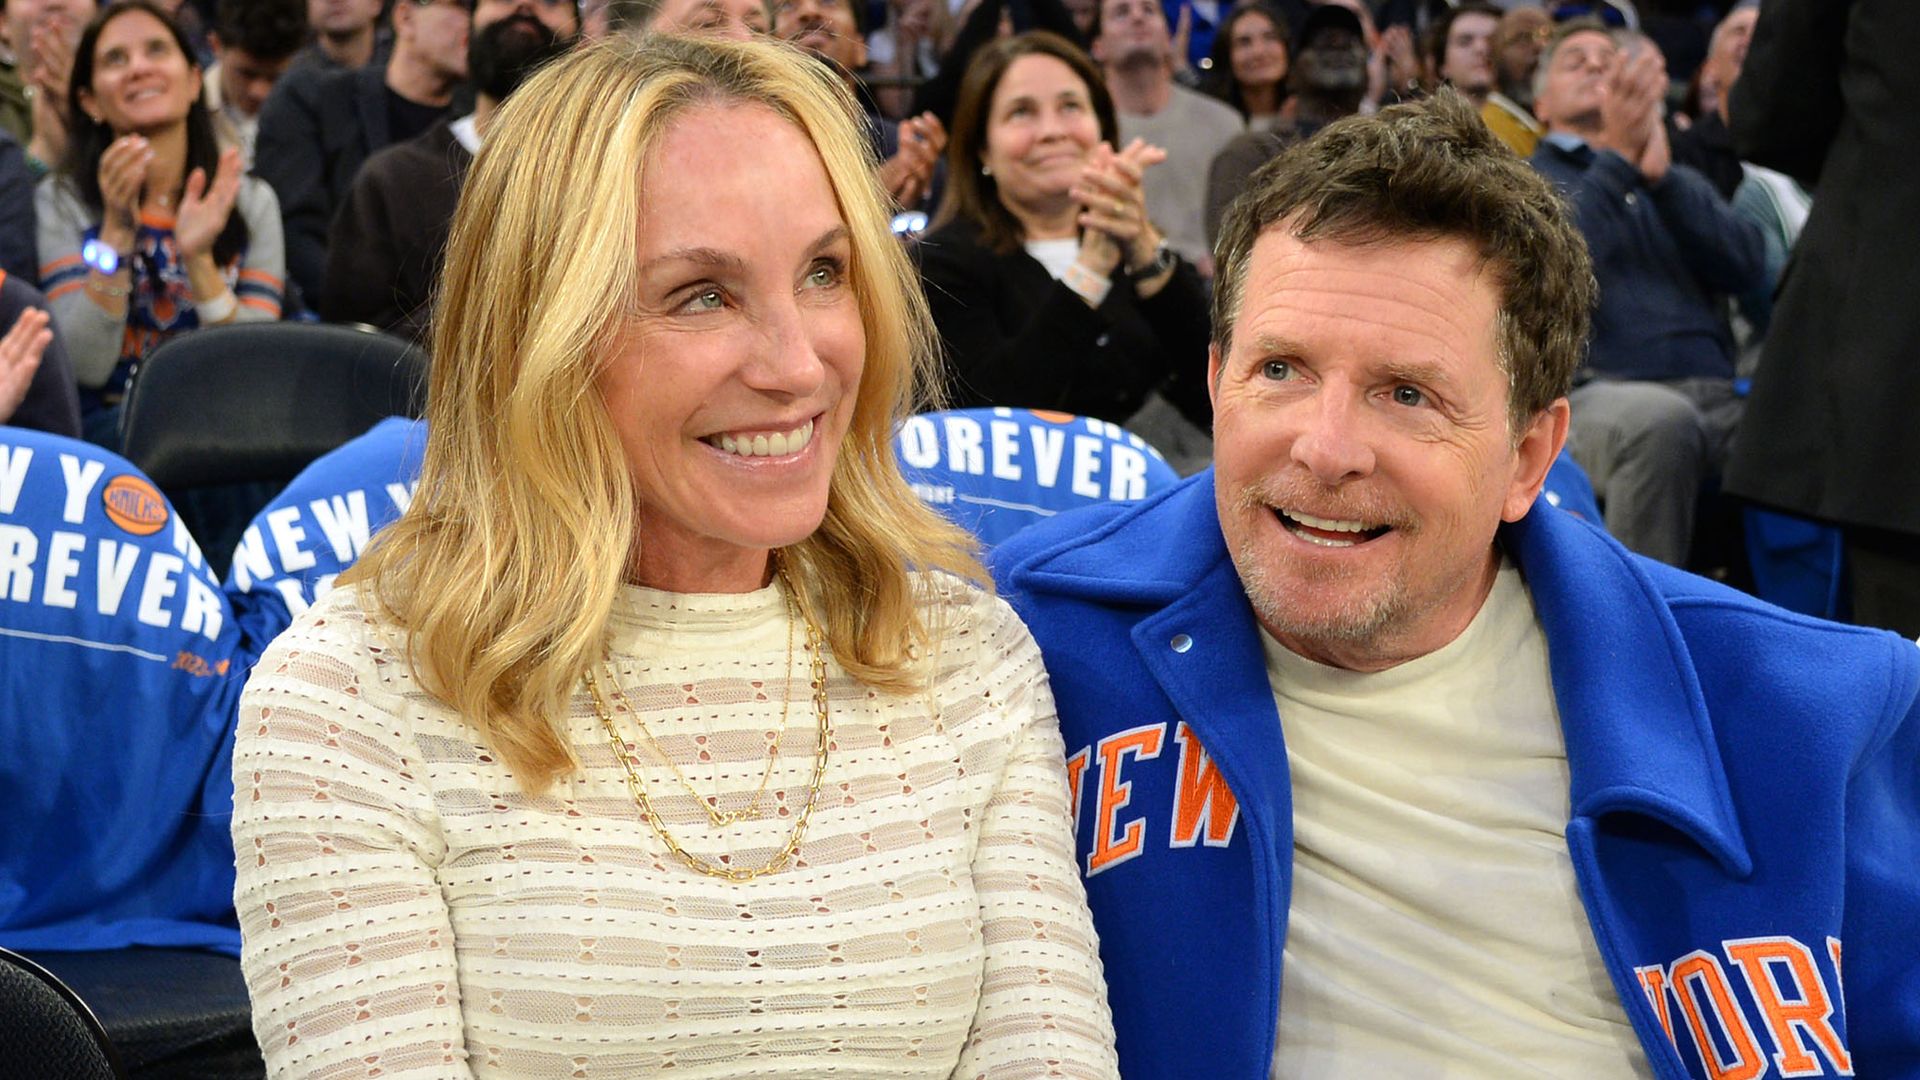 Michael J. Fox attended the Boston Celtics v New York Knicks NBA Basketball game with this wife Tracy Pollan